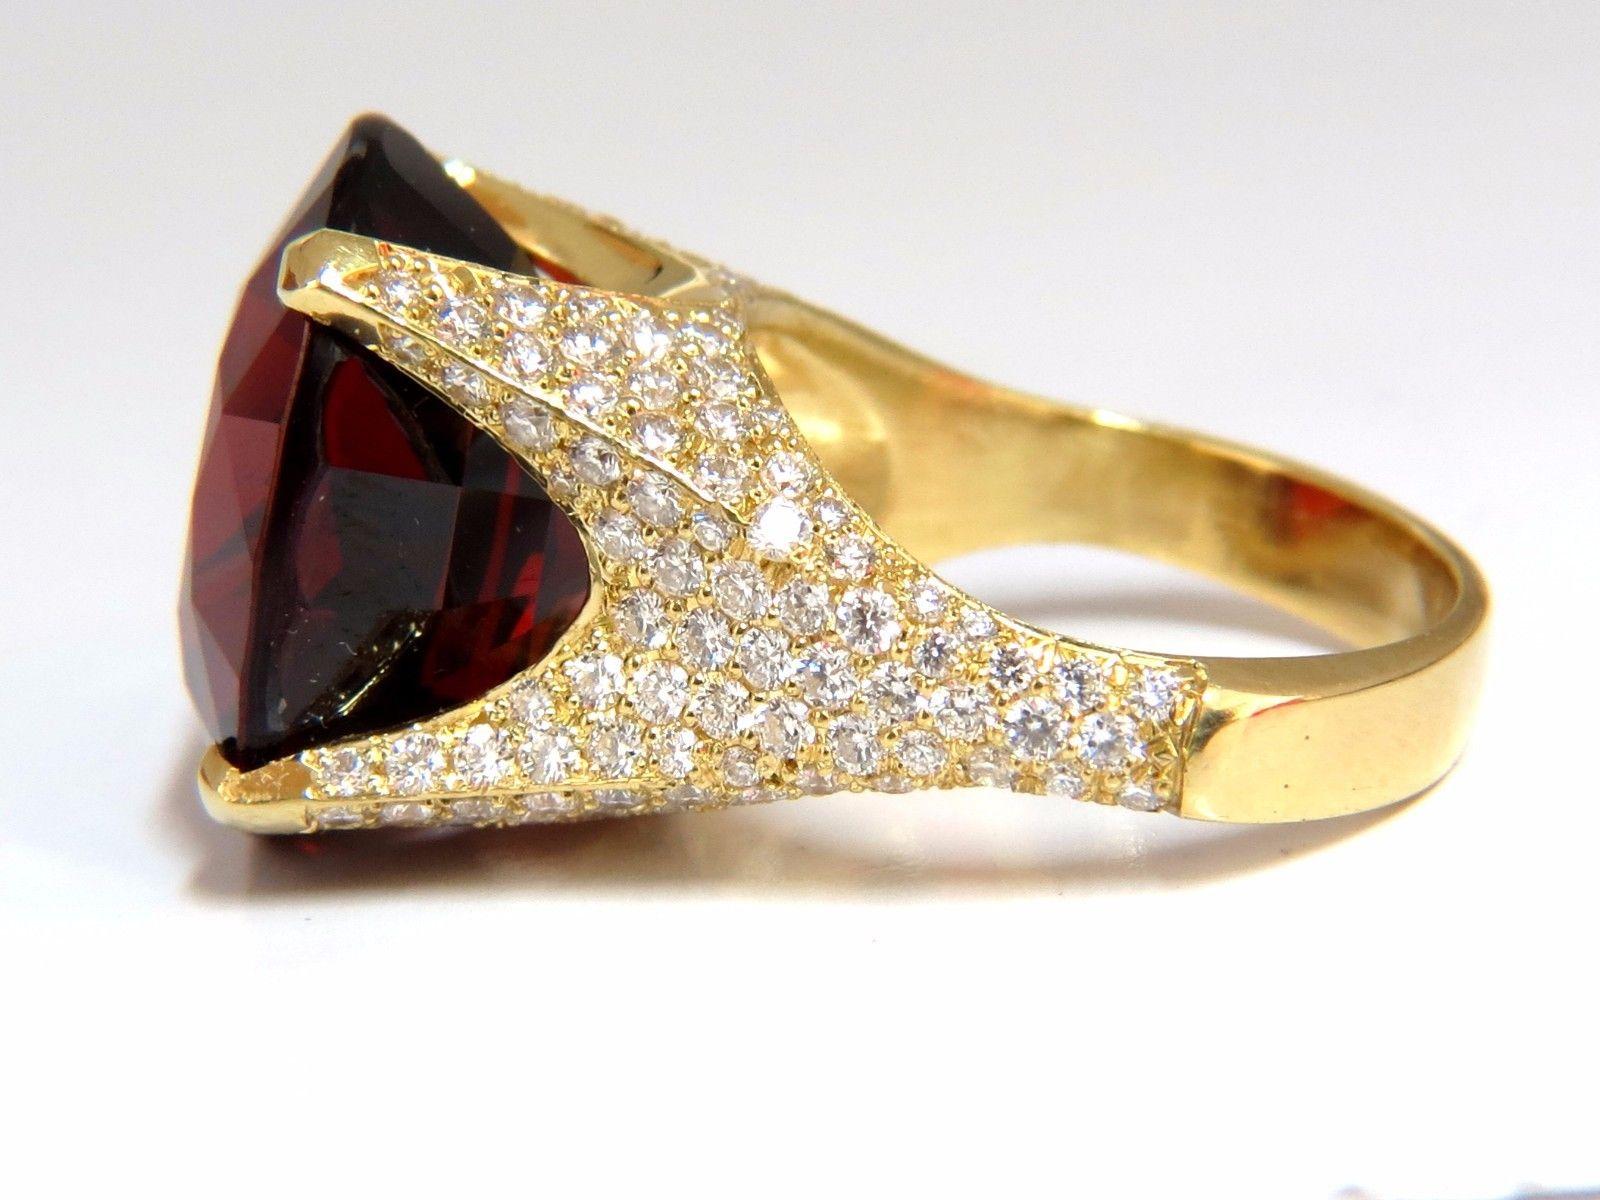 Raised Spessartite Crown

GIA 23.91ct. Natural Red Spessartite & 2.40ct. diamonds ring.

GIA Certified Report ID: 1162433127

17.69 X 15.07 X 10.68mm

Full cut oval brilliant 

Clean Clarity & Transparent

2.40ct. Diamonds.

Rounds Full cuts